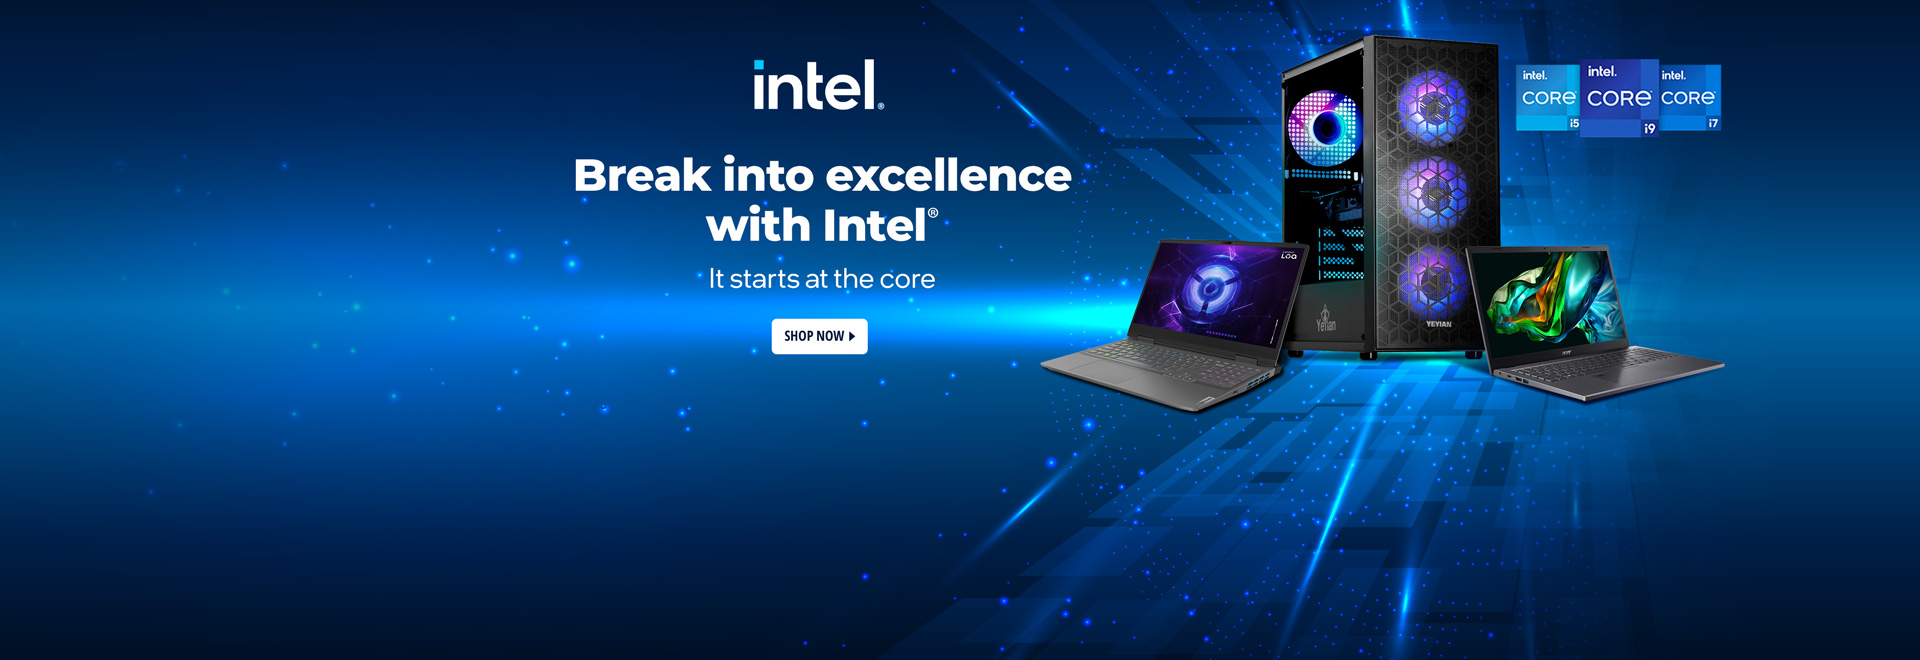 Break into excellence with Intel